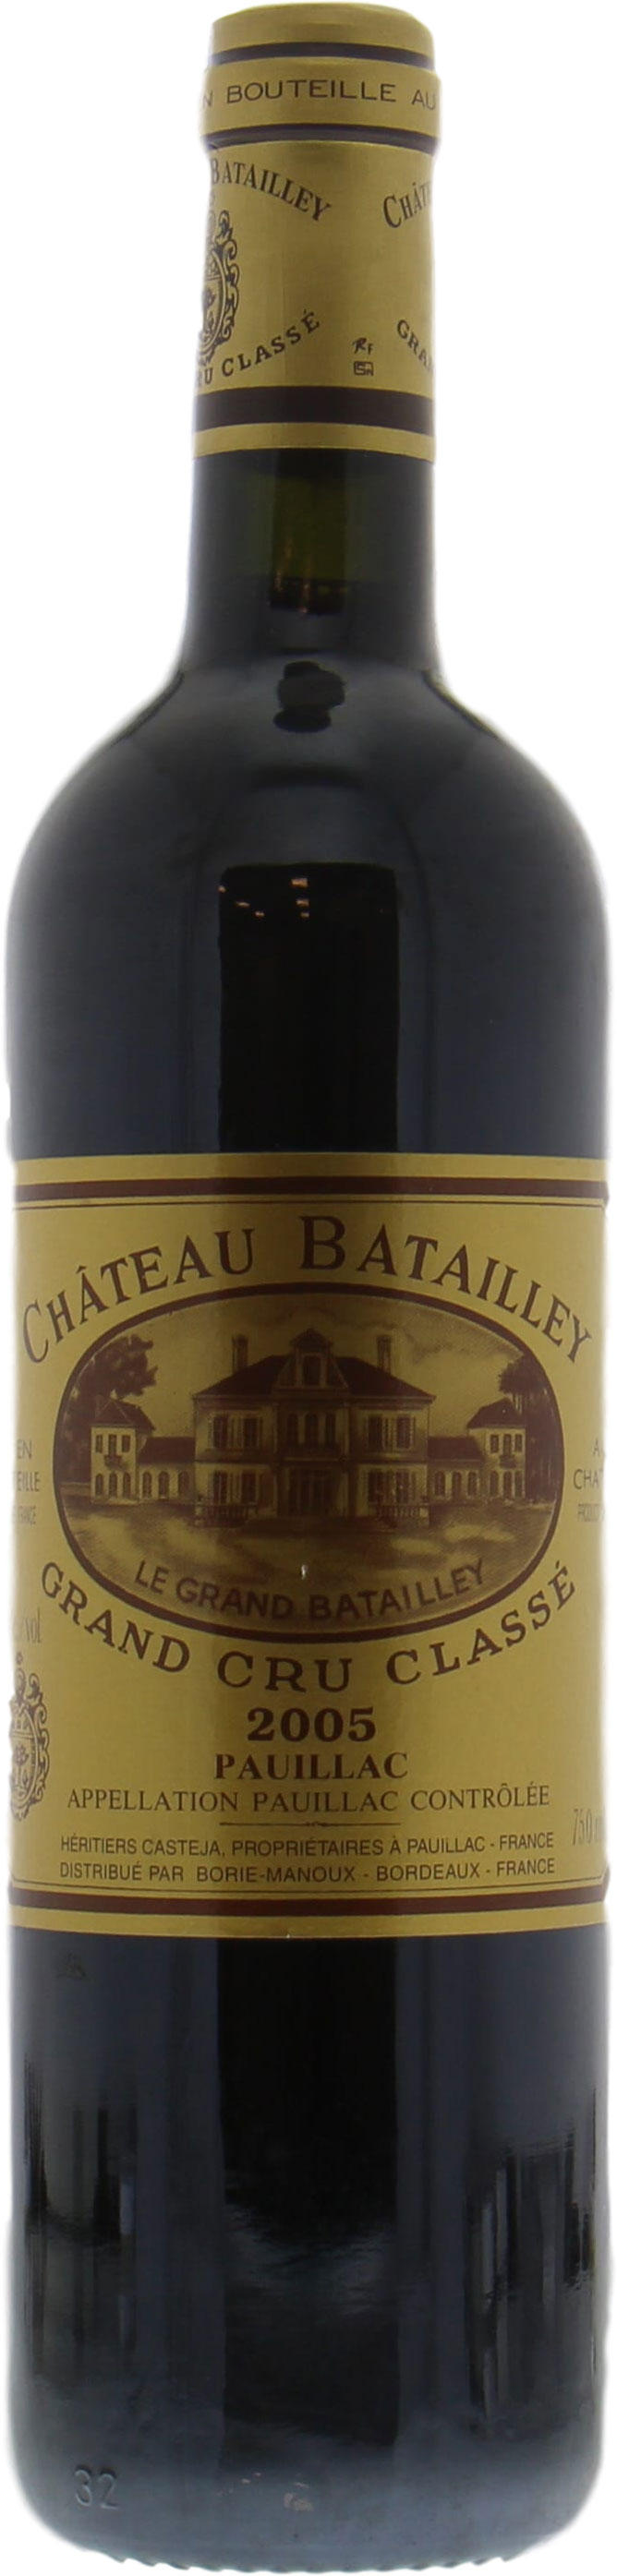 Chateau Batailley - Chateau Batailley 2005 Perfect